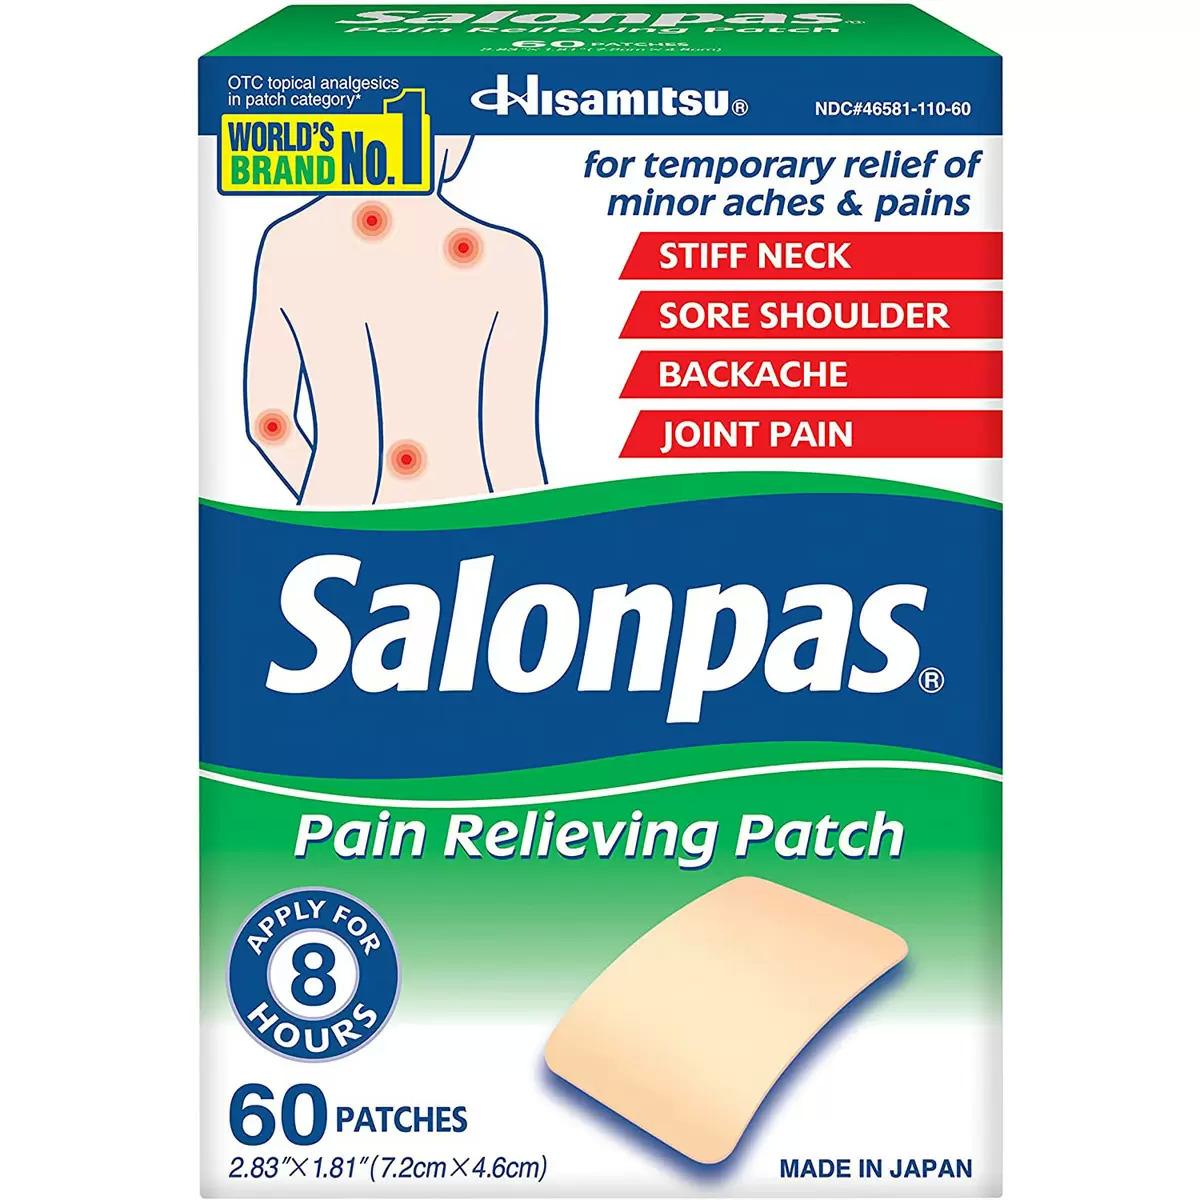 Salonpas Pain Relieving Patch 60 Pack for $6.49 Shipped